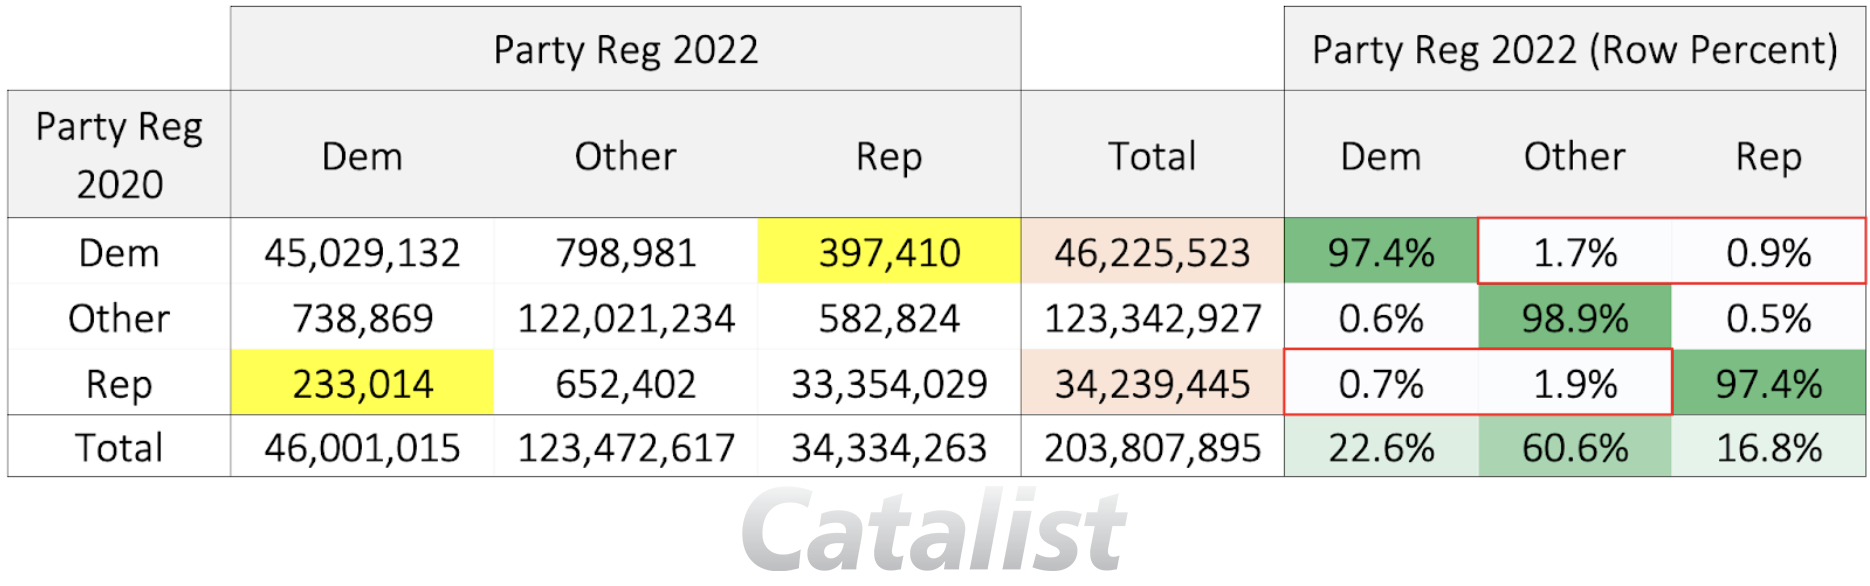 Table 1: Party registration changes, from 2020 to 2022